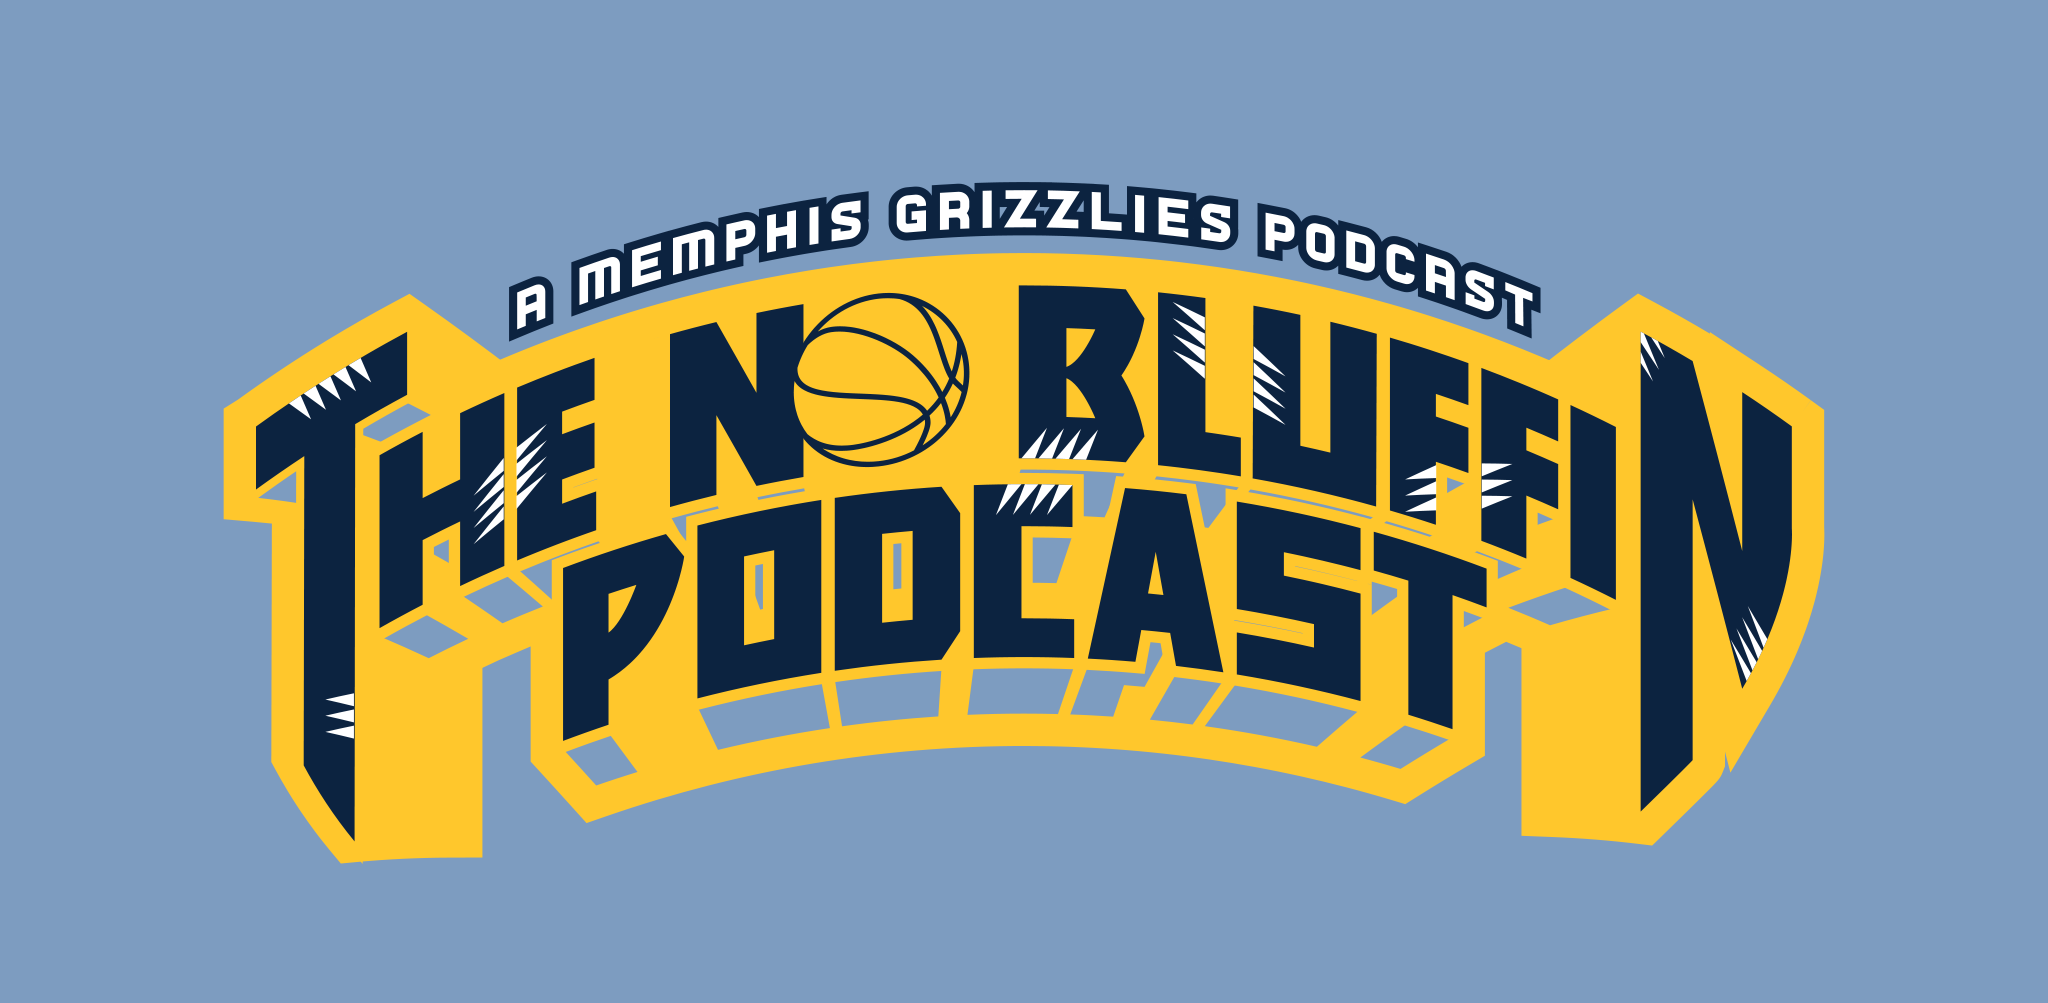 Featured image for “No Bluffin Podcast Episode 4: So Hard To Say Goodbye | Lakers vs Grizzlies Overview & Going Into The Post Season”